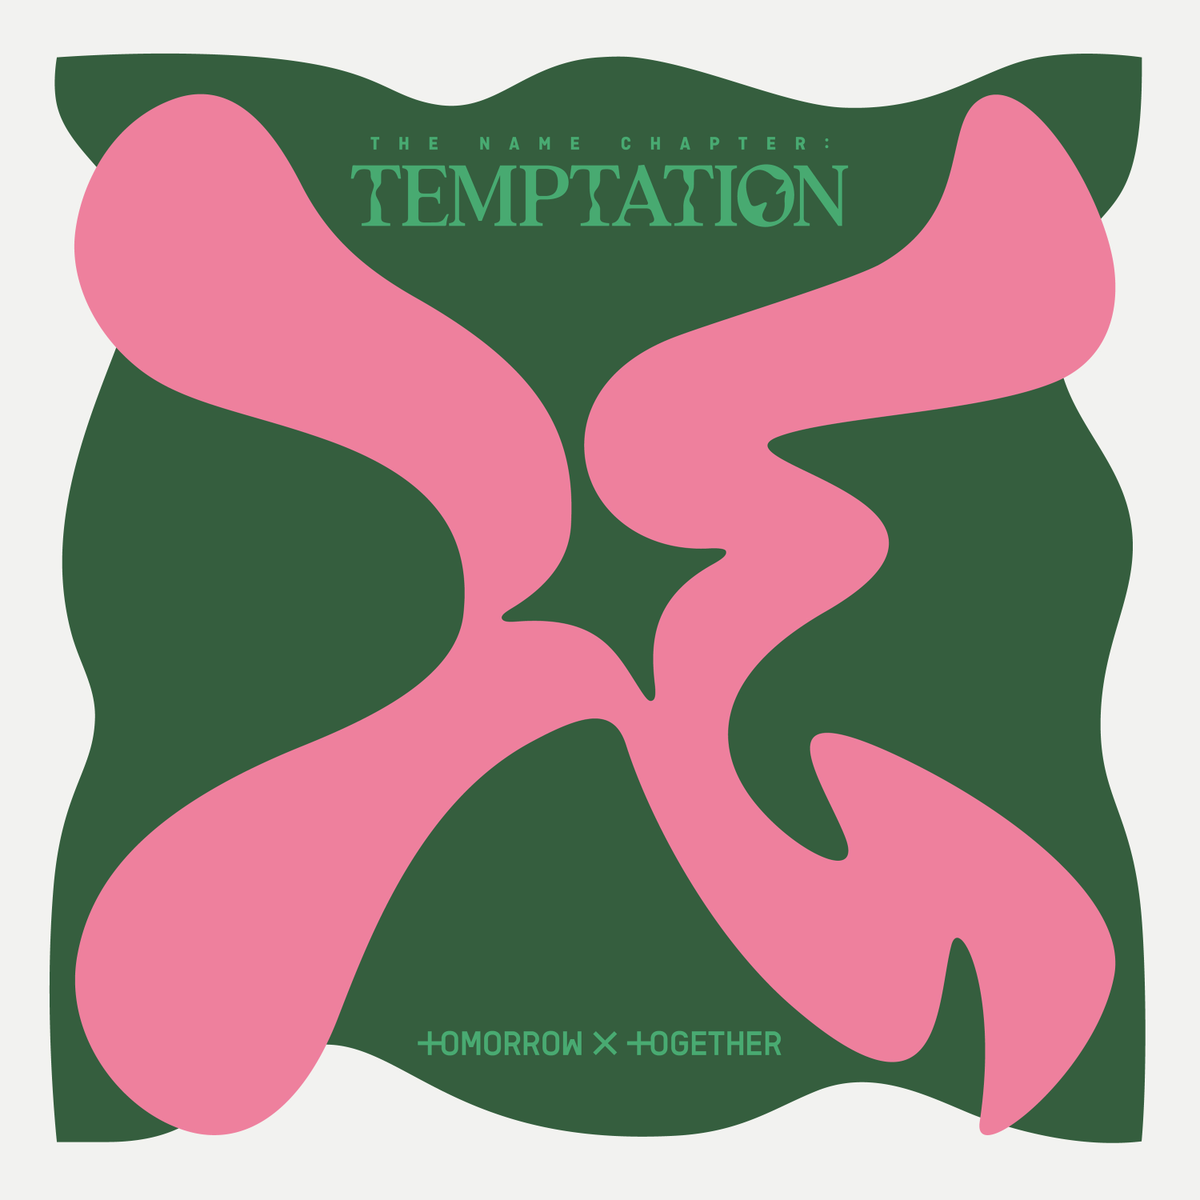 https://static.wikia.nocookie.net/kpop/images/b/b8/TXT_The_Name_Chapter_Temptation_digital_album_cover.png/revision/latest?cb=20230119220315